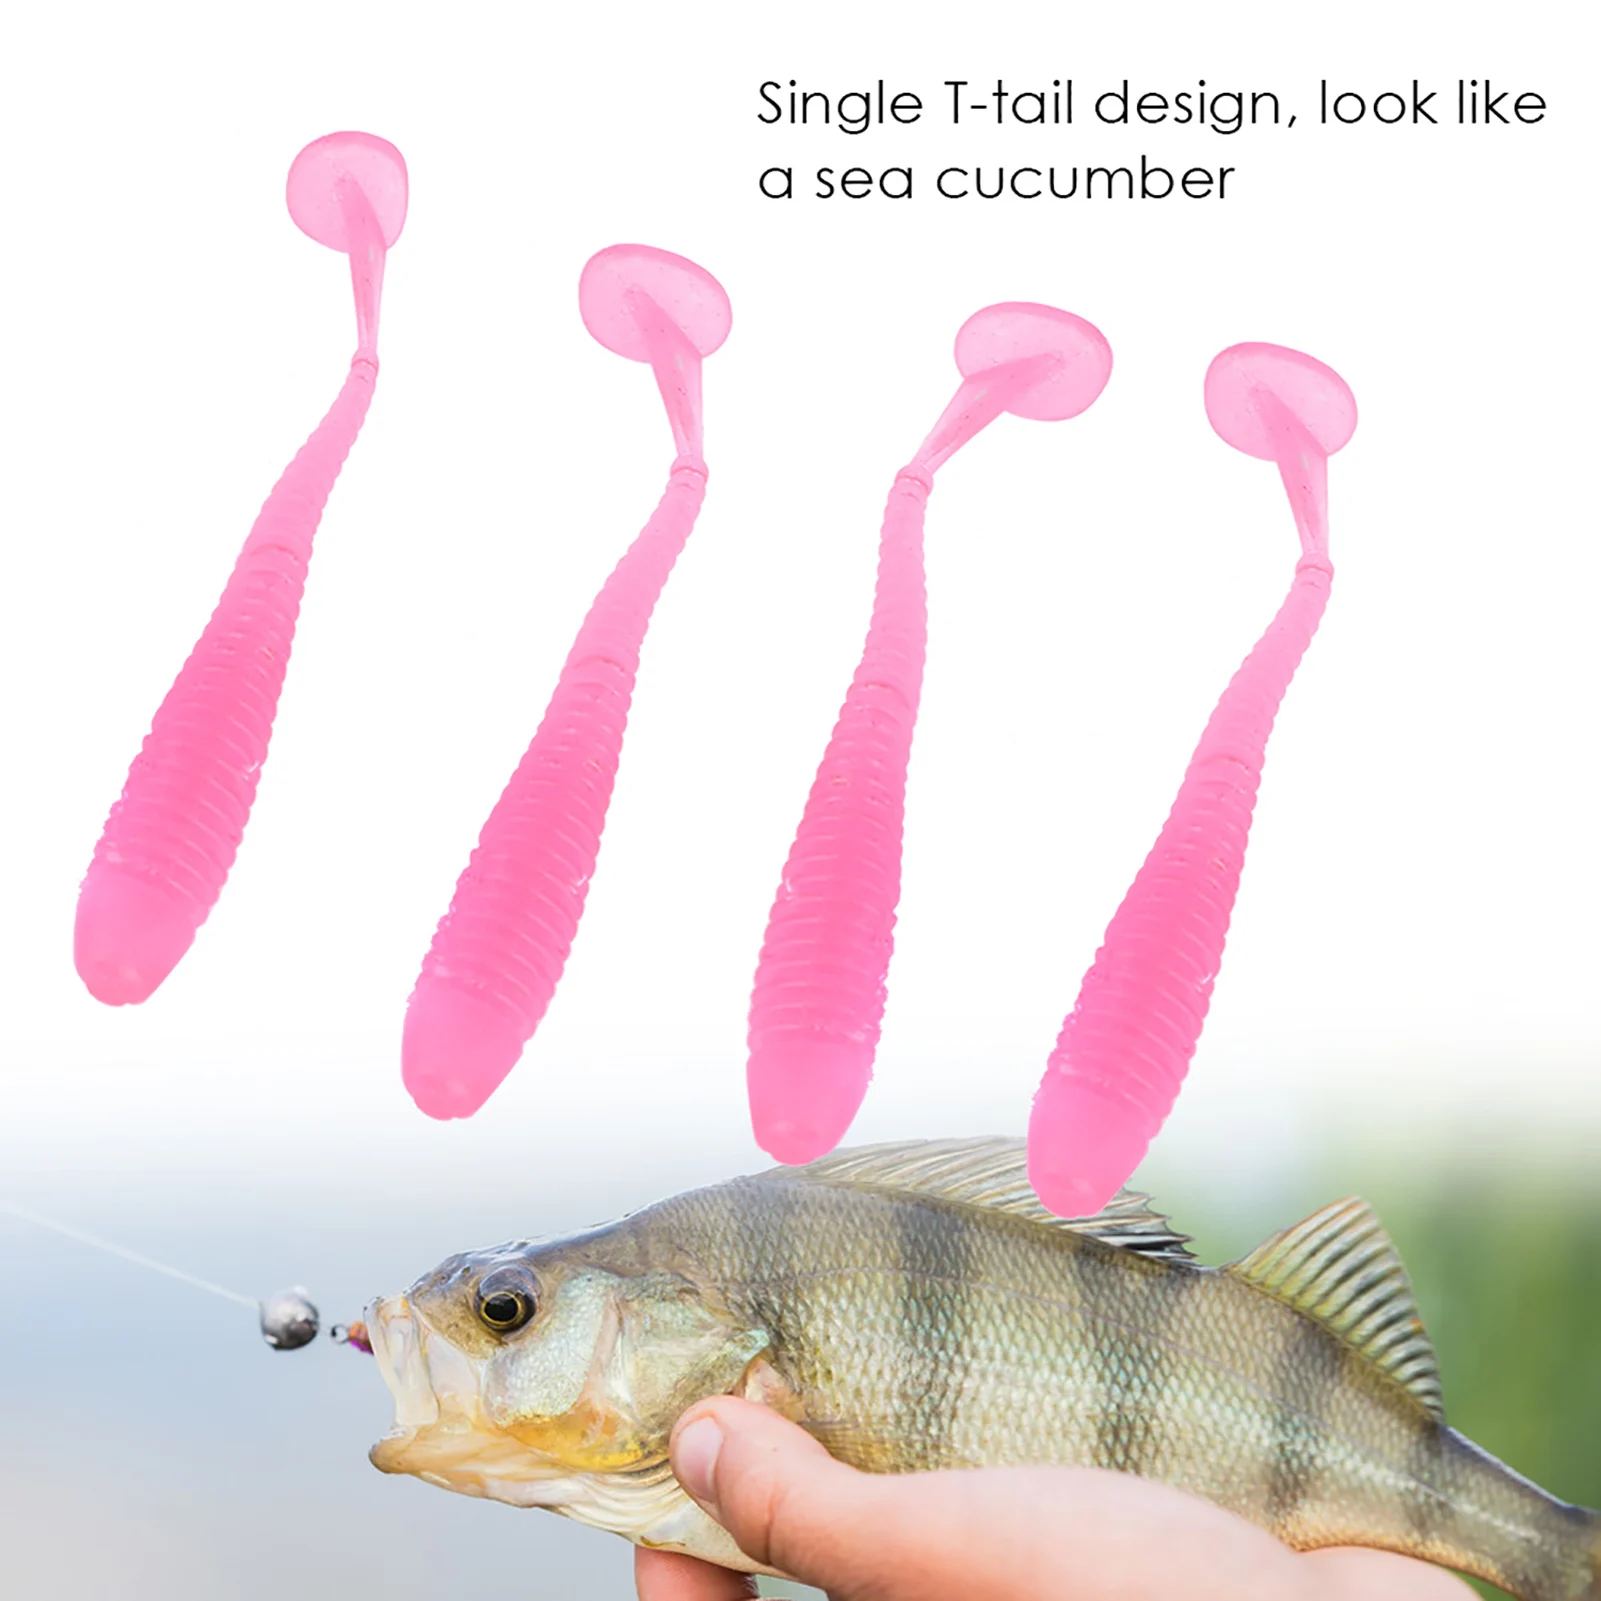 

50PCS 5cm Soft Plastic Fishing Lures T Tail Grub Worm Baits Fish Tackle Accessory Pink